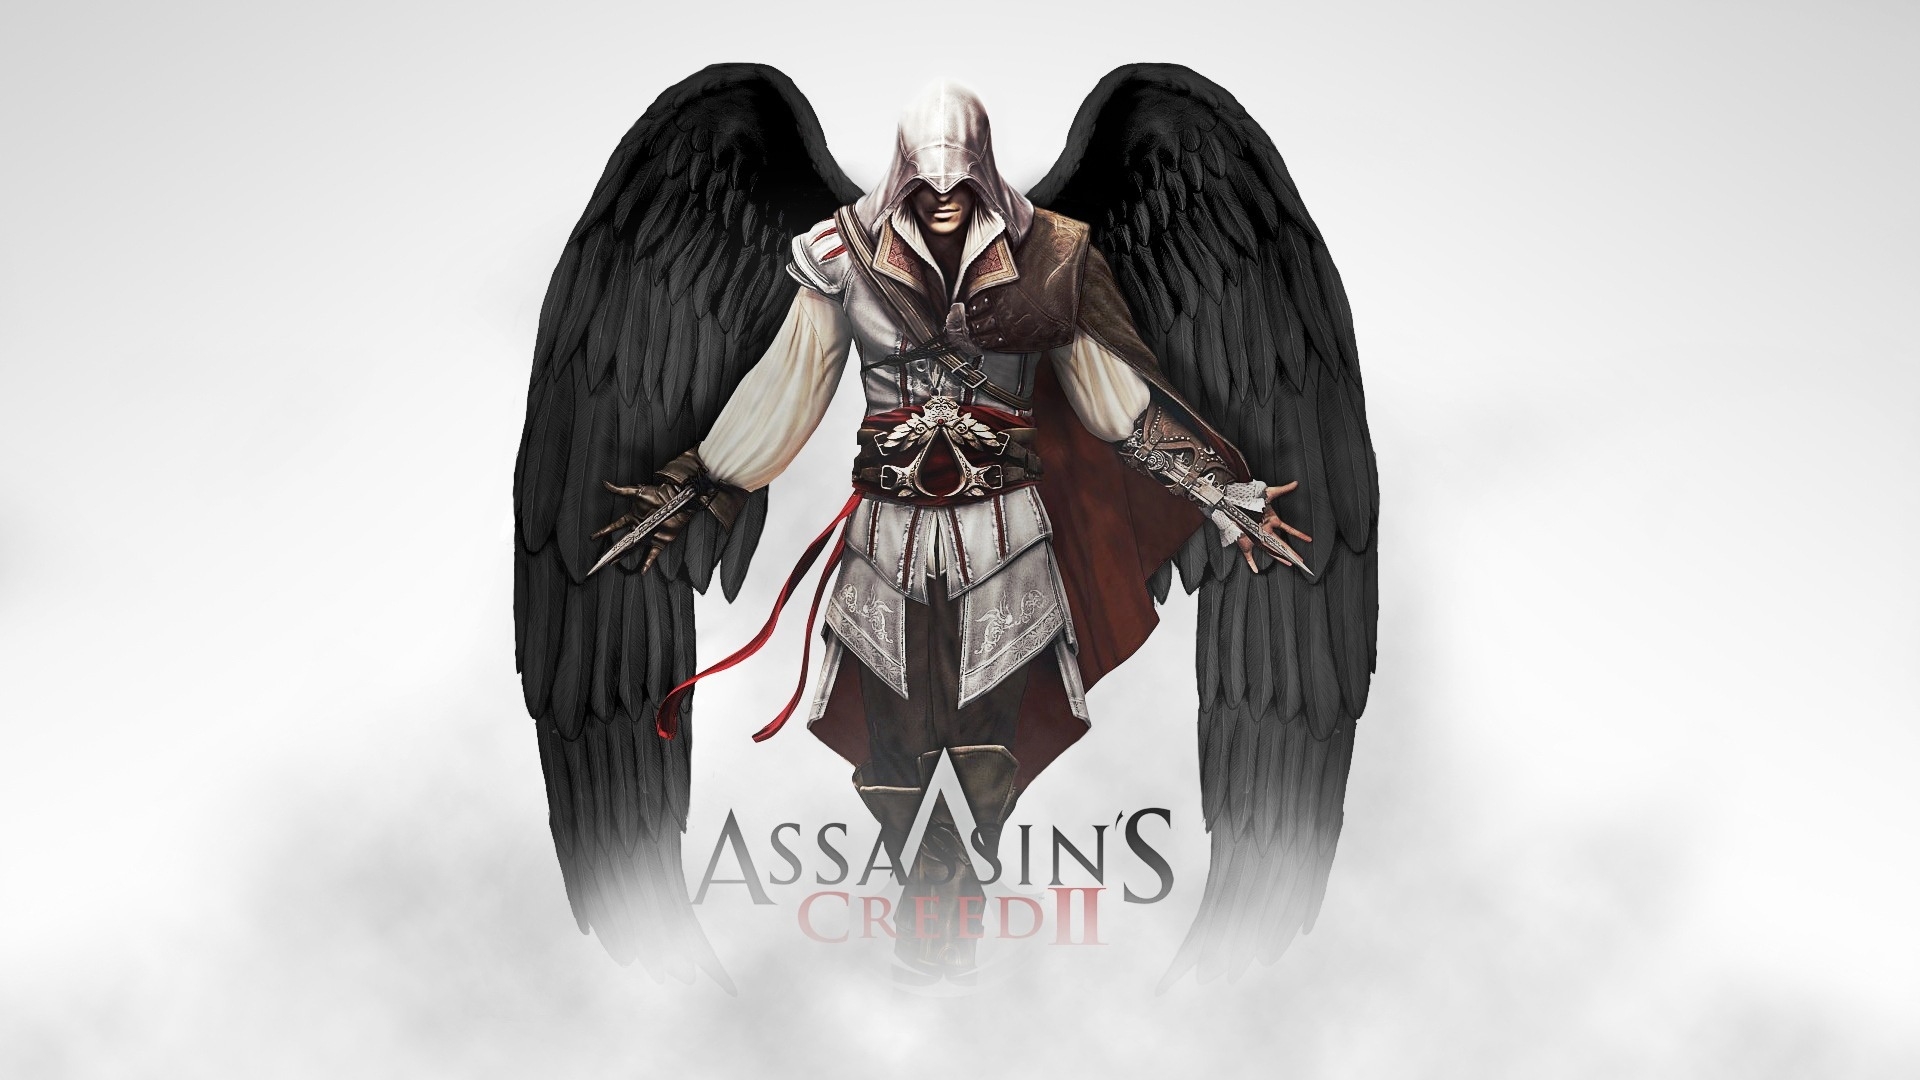 Assassin Creed 2 for 1920 x 1080 HDTV 1080p resolution